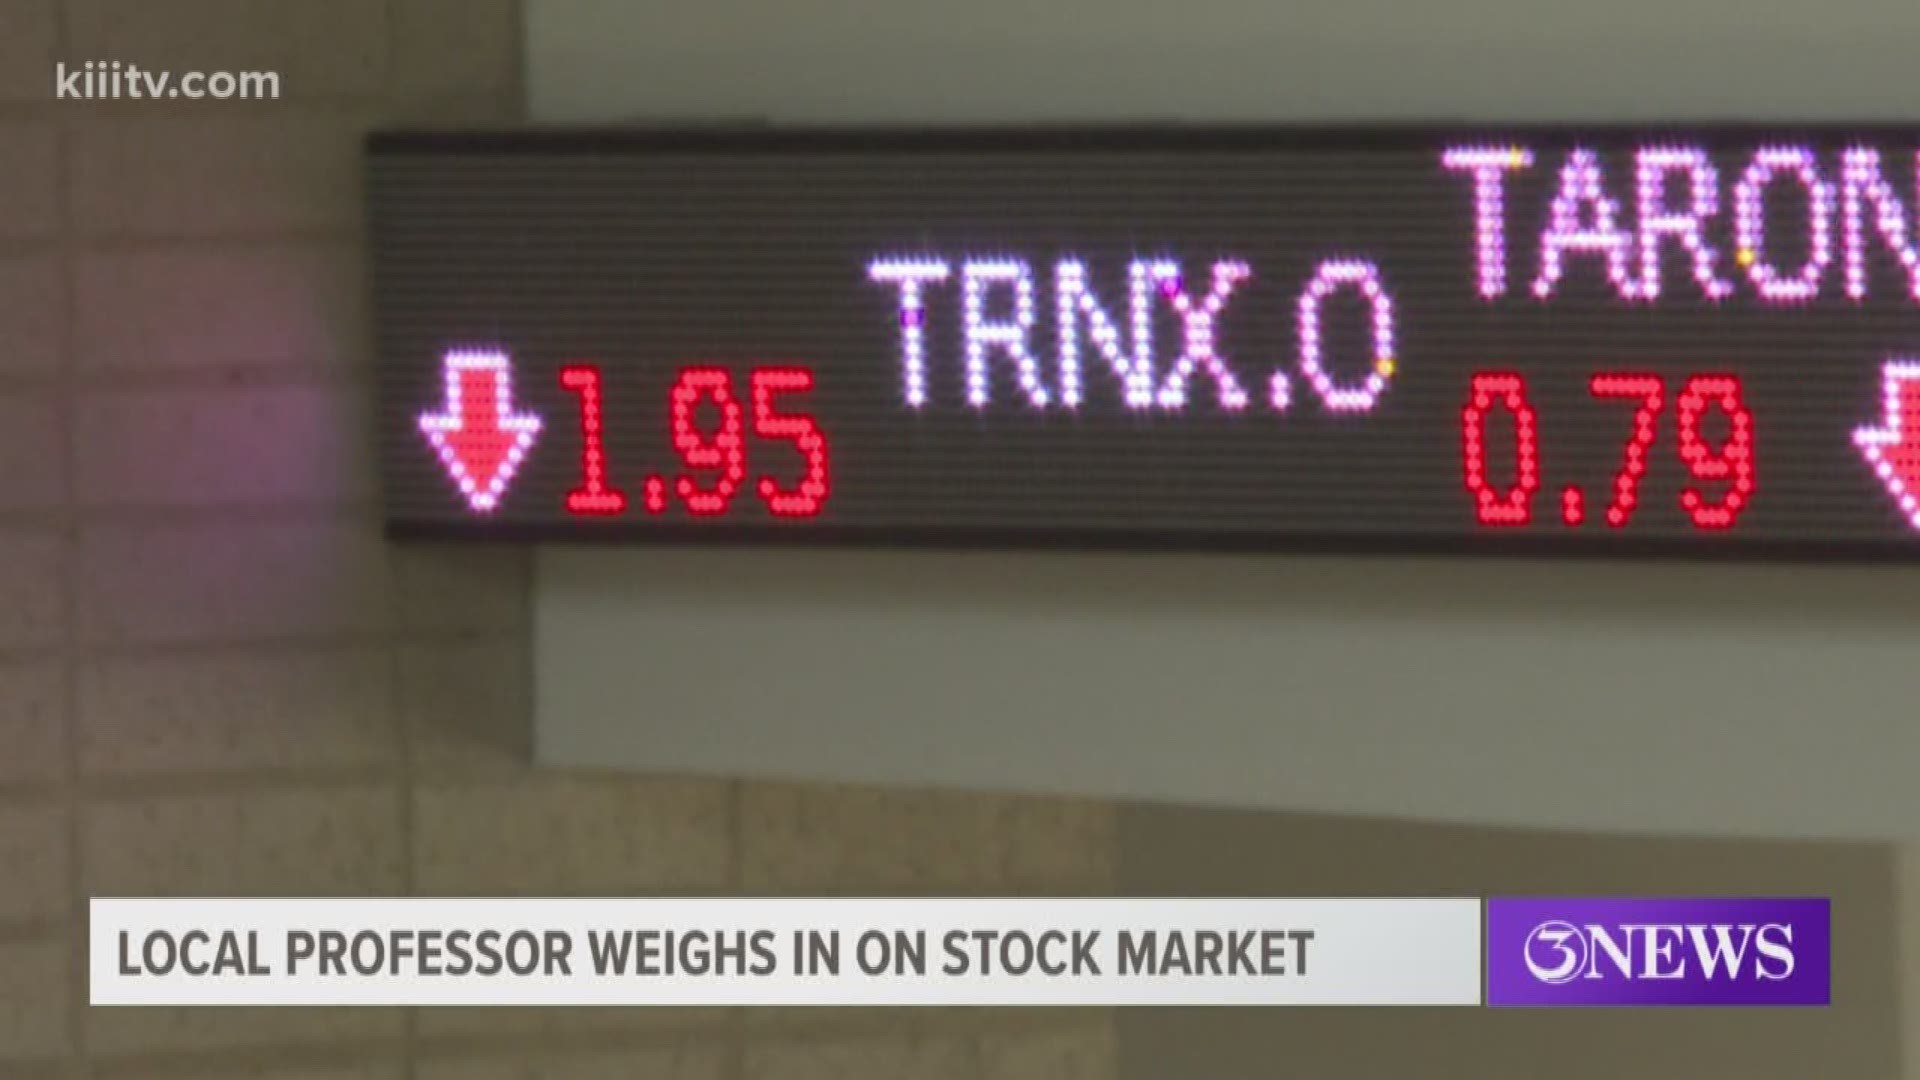 Dr. Jim Lee, an economics professor at Texas A&M University-Corpus Christi, said Wednesday's drop in the stock market was triggered by what he called a "fear factor," with many having flashbacks to 10 years ago when the country went through a recession.